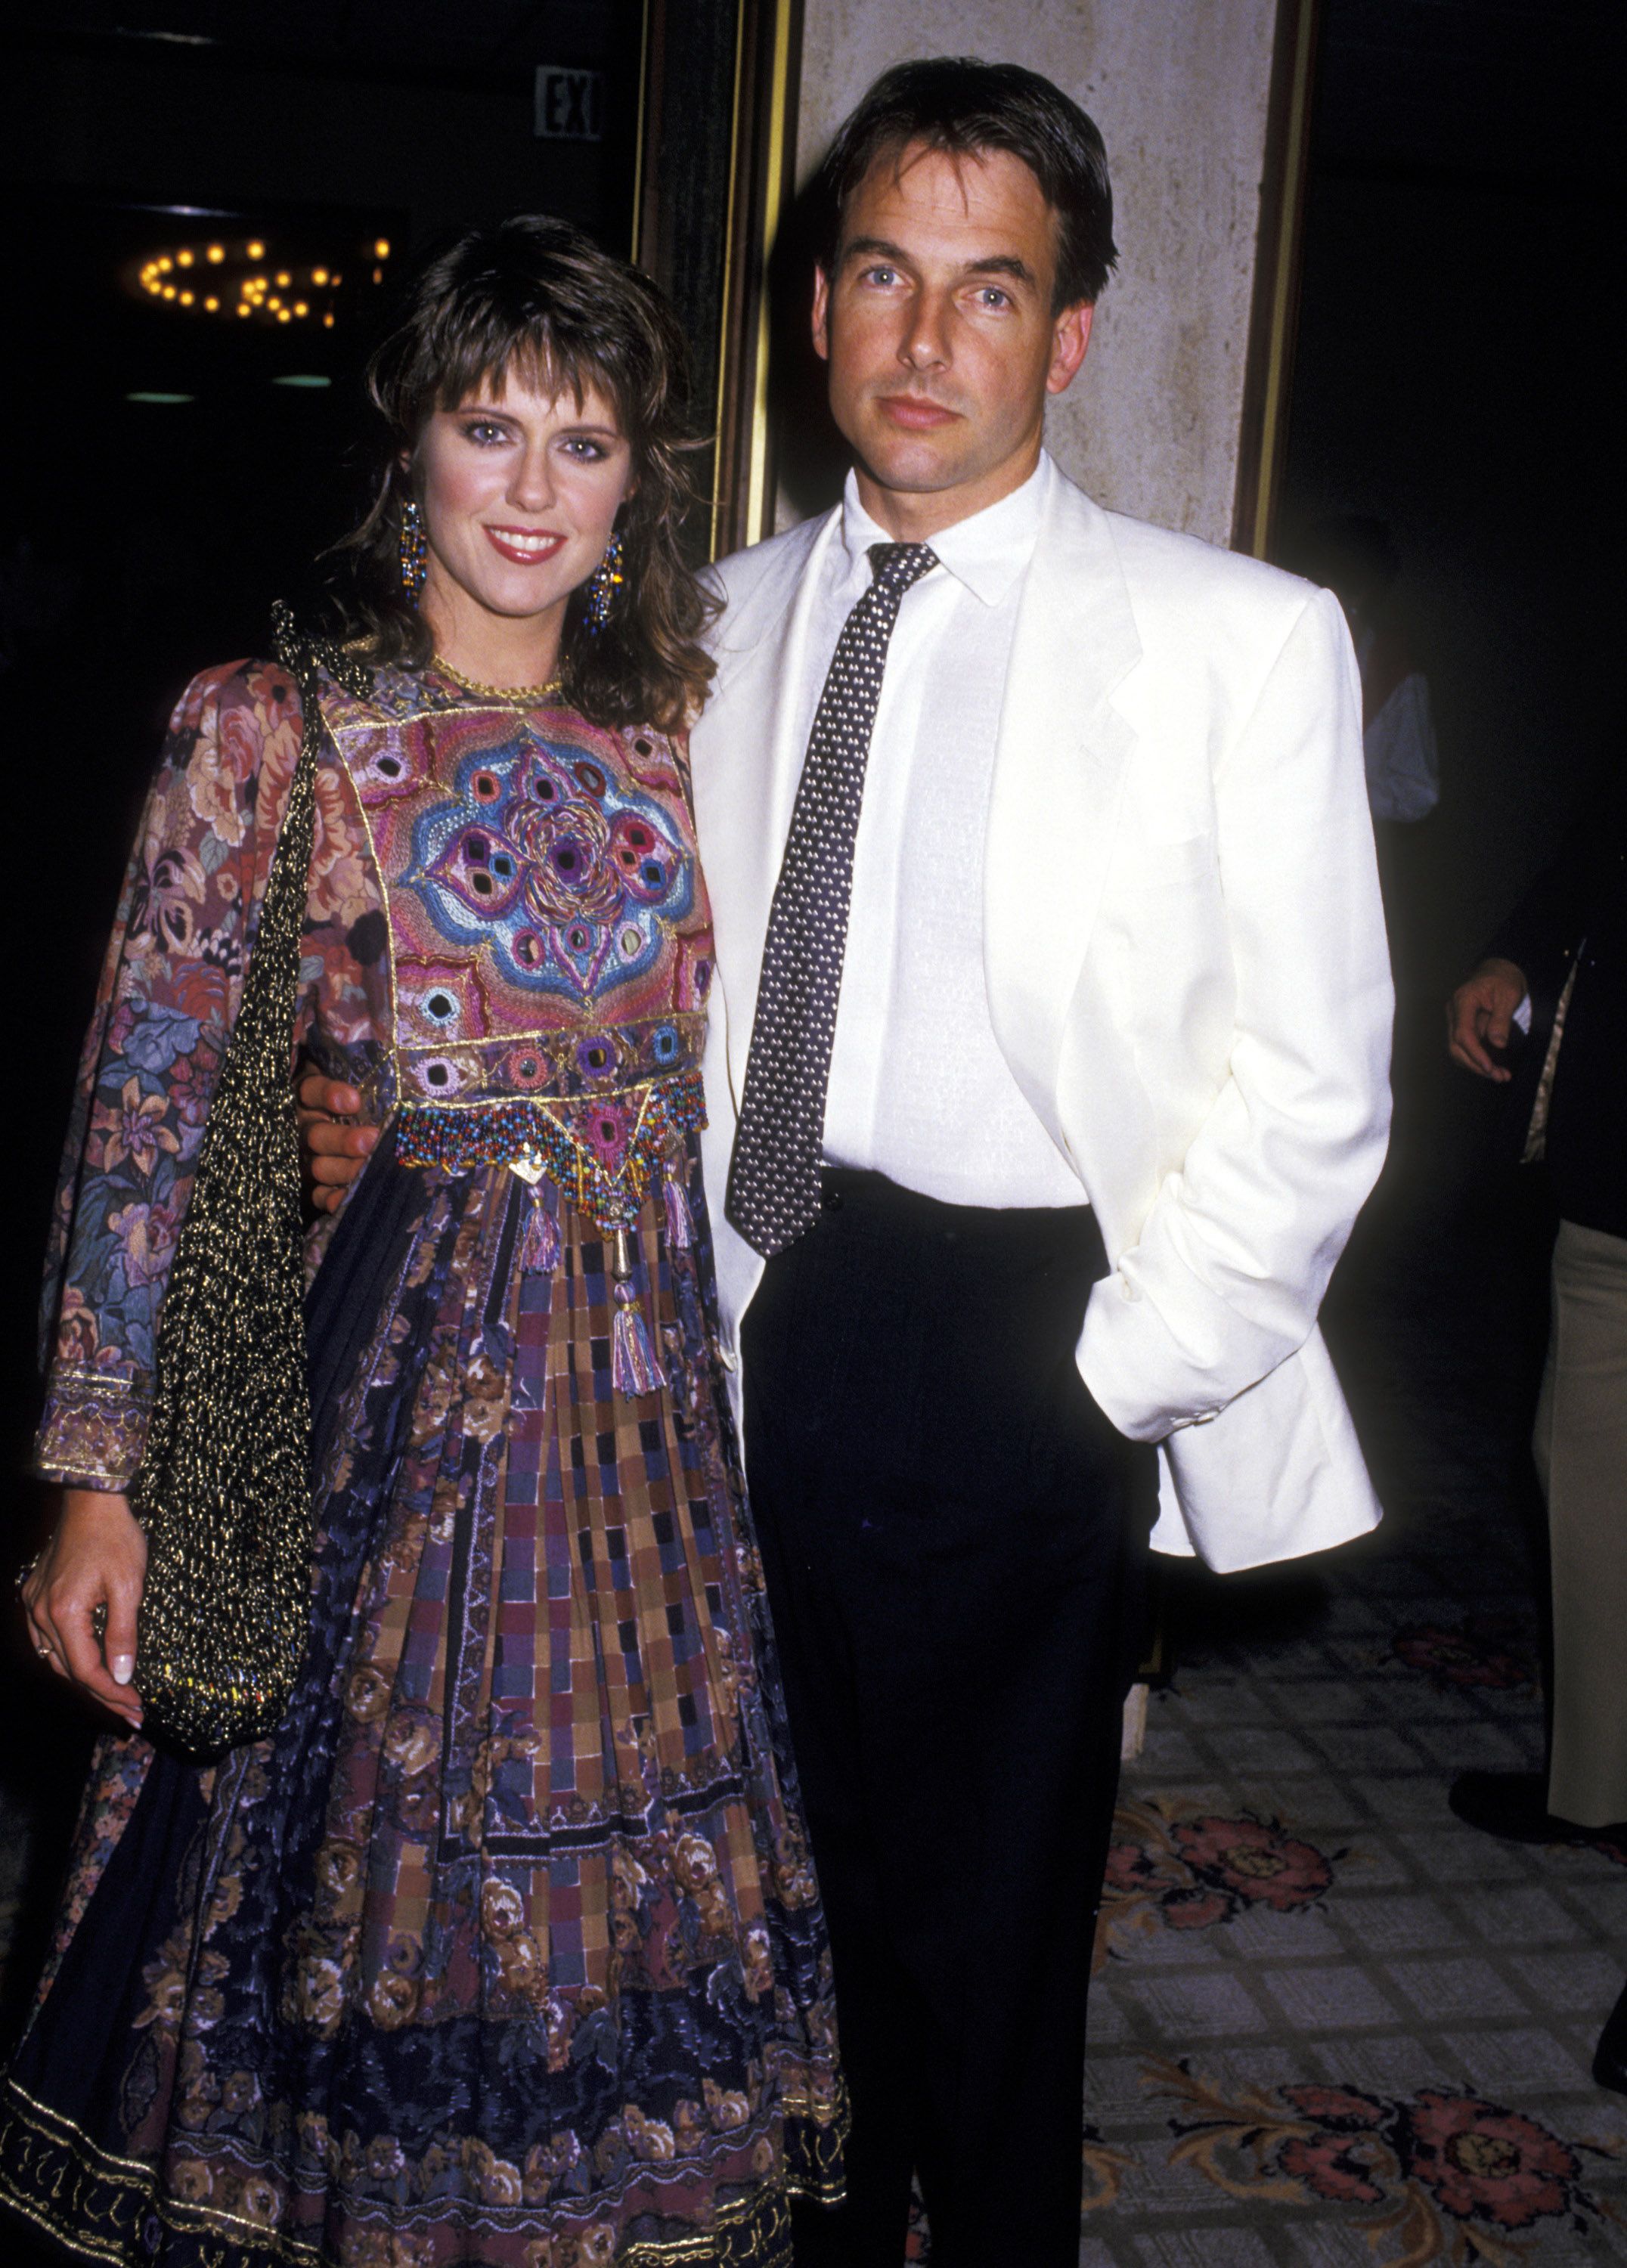 Pam Dawber and Mark Harmon during Premiere of "Dr. Dolittle" in New York City, New York. | Source: Getty Images